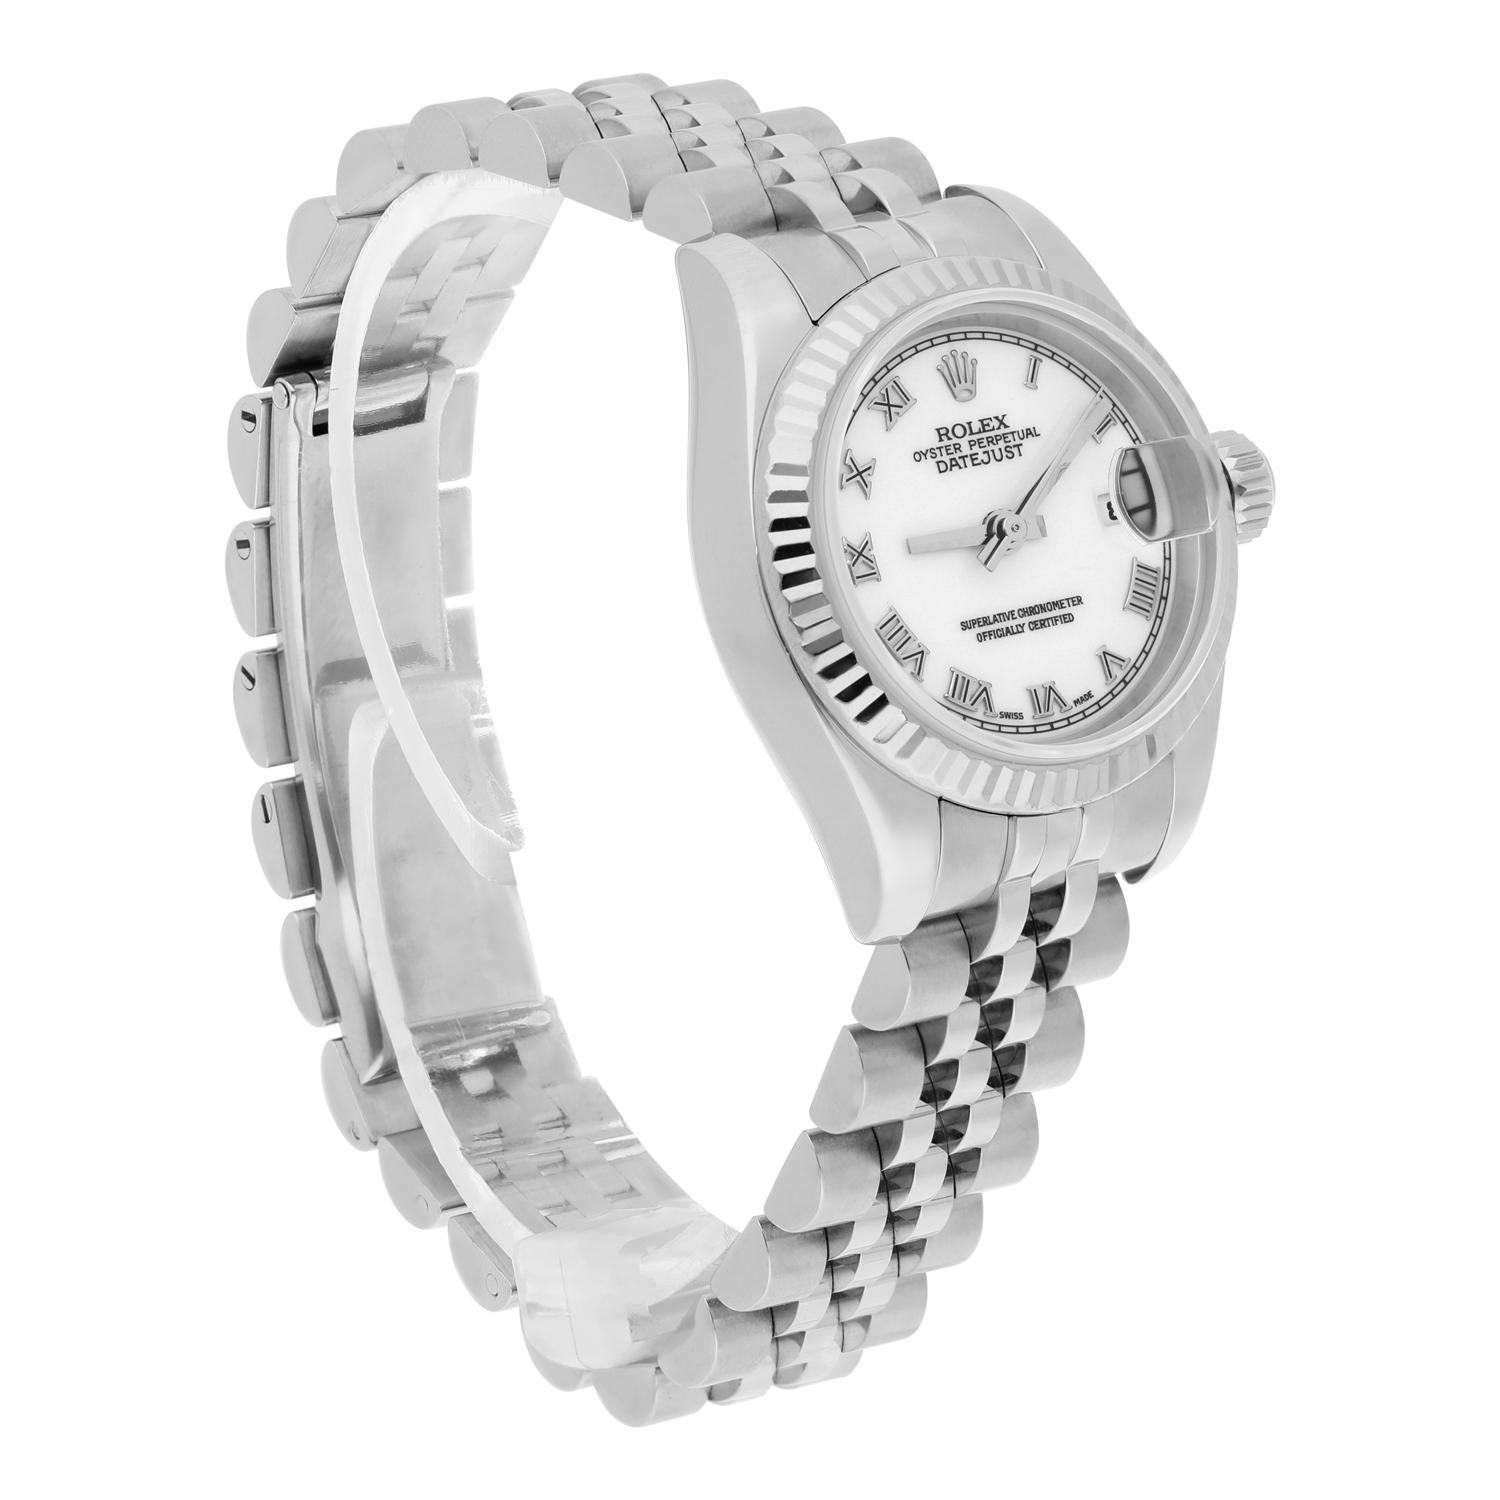 Rolex Lady-Datejust 26mm 179174 Steel & White Gold Watch Roman Dial Complete! For Sale 1